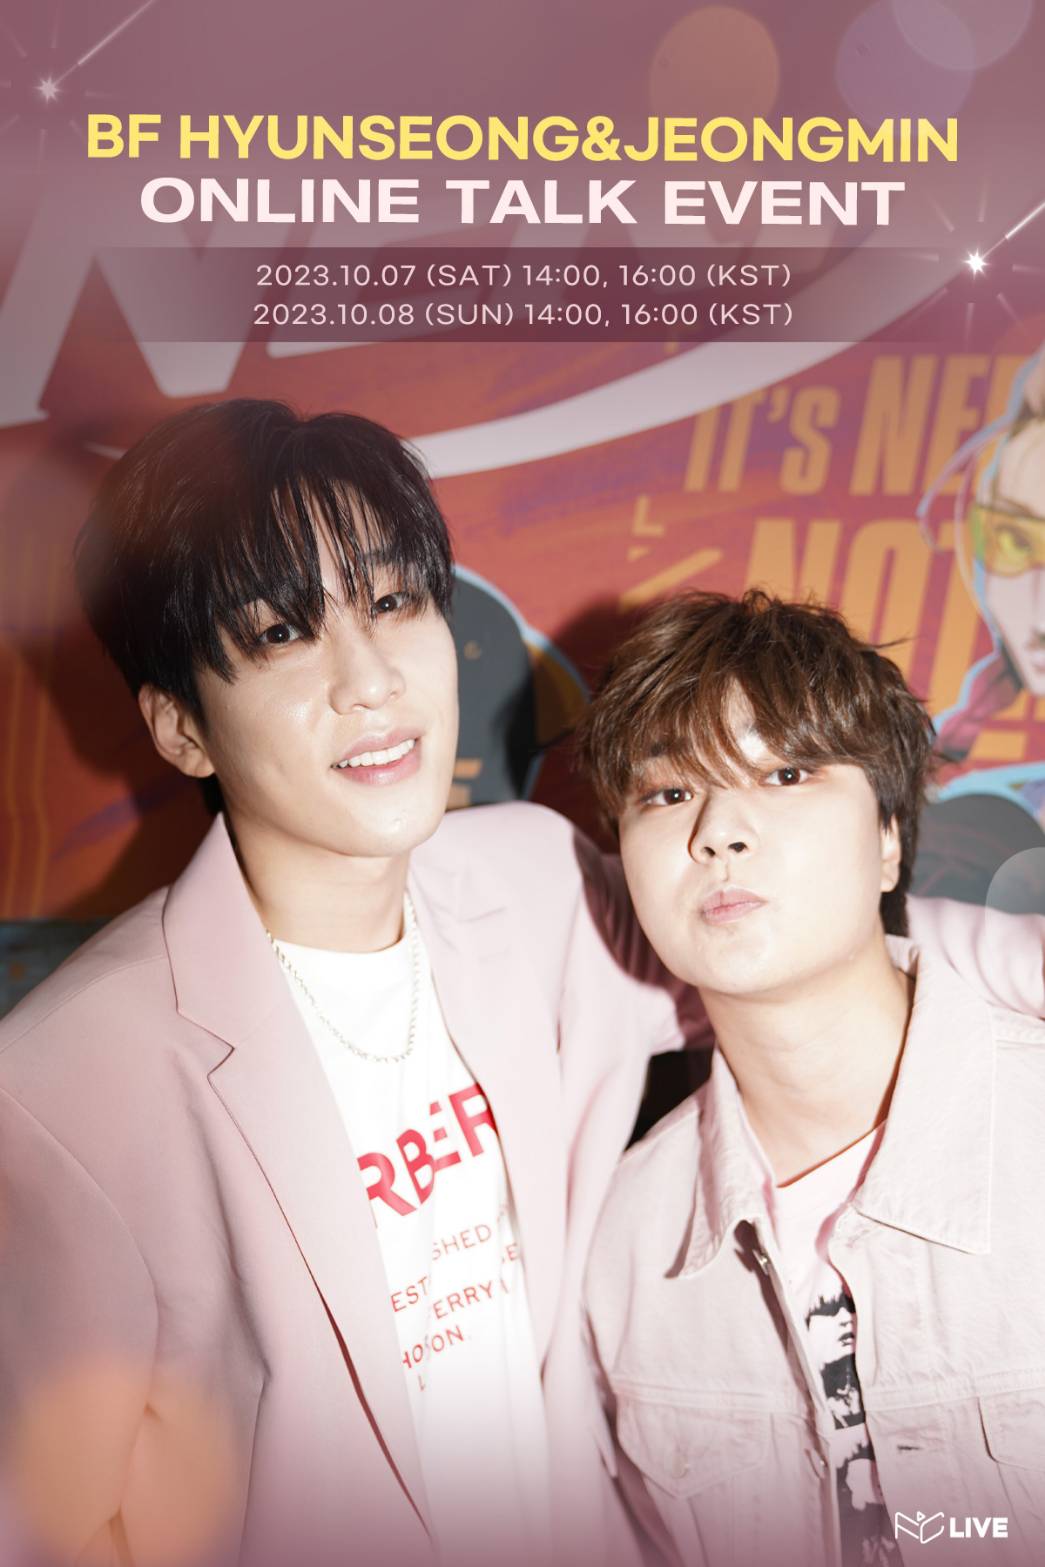 BF HYUNSEONG&JEONGMIN ONLINE TALK EVENT